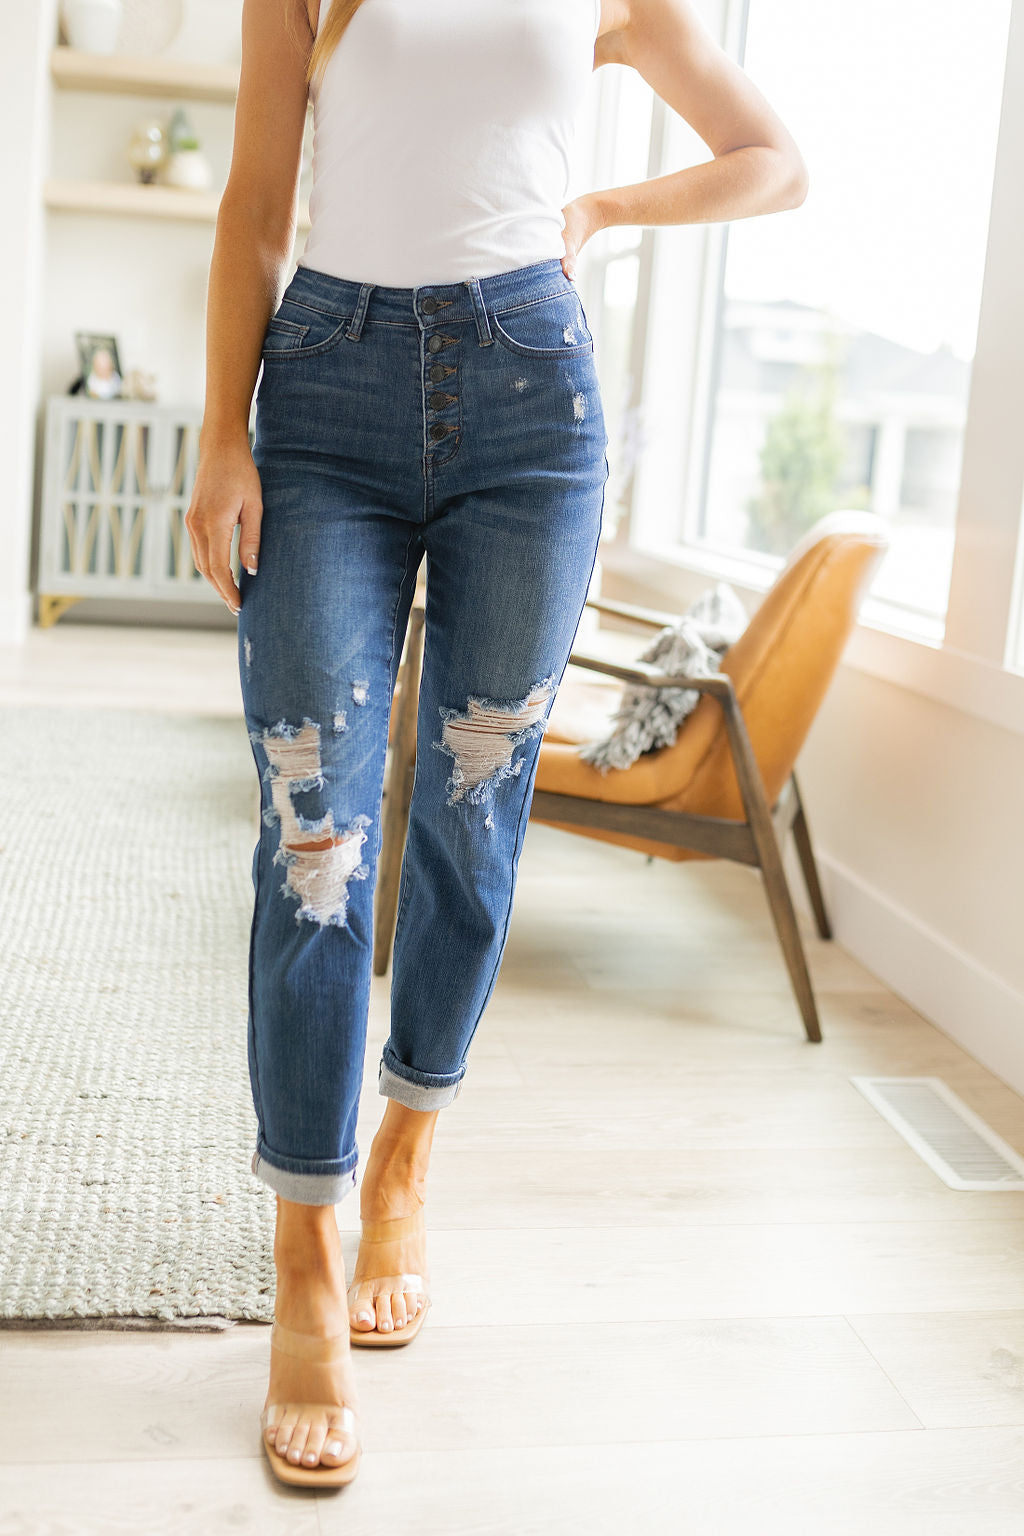 Judy Blue Colt High Rise Button Fly Distressed Boyfriend Jeans - AnnRose Boutique